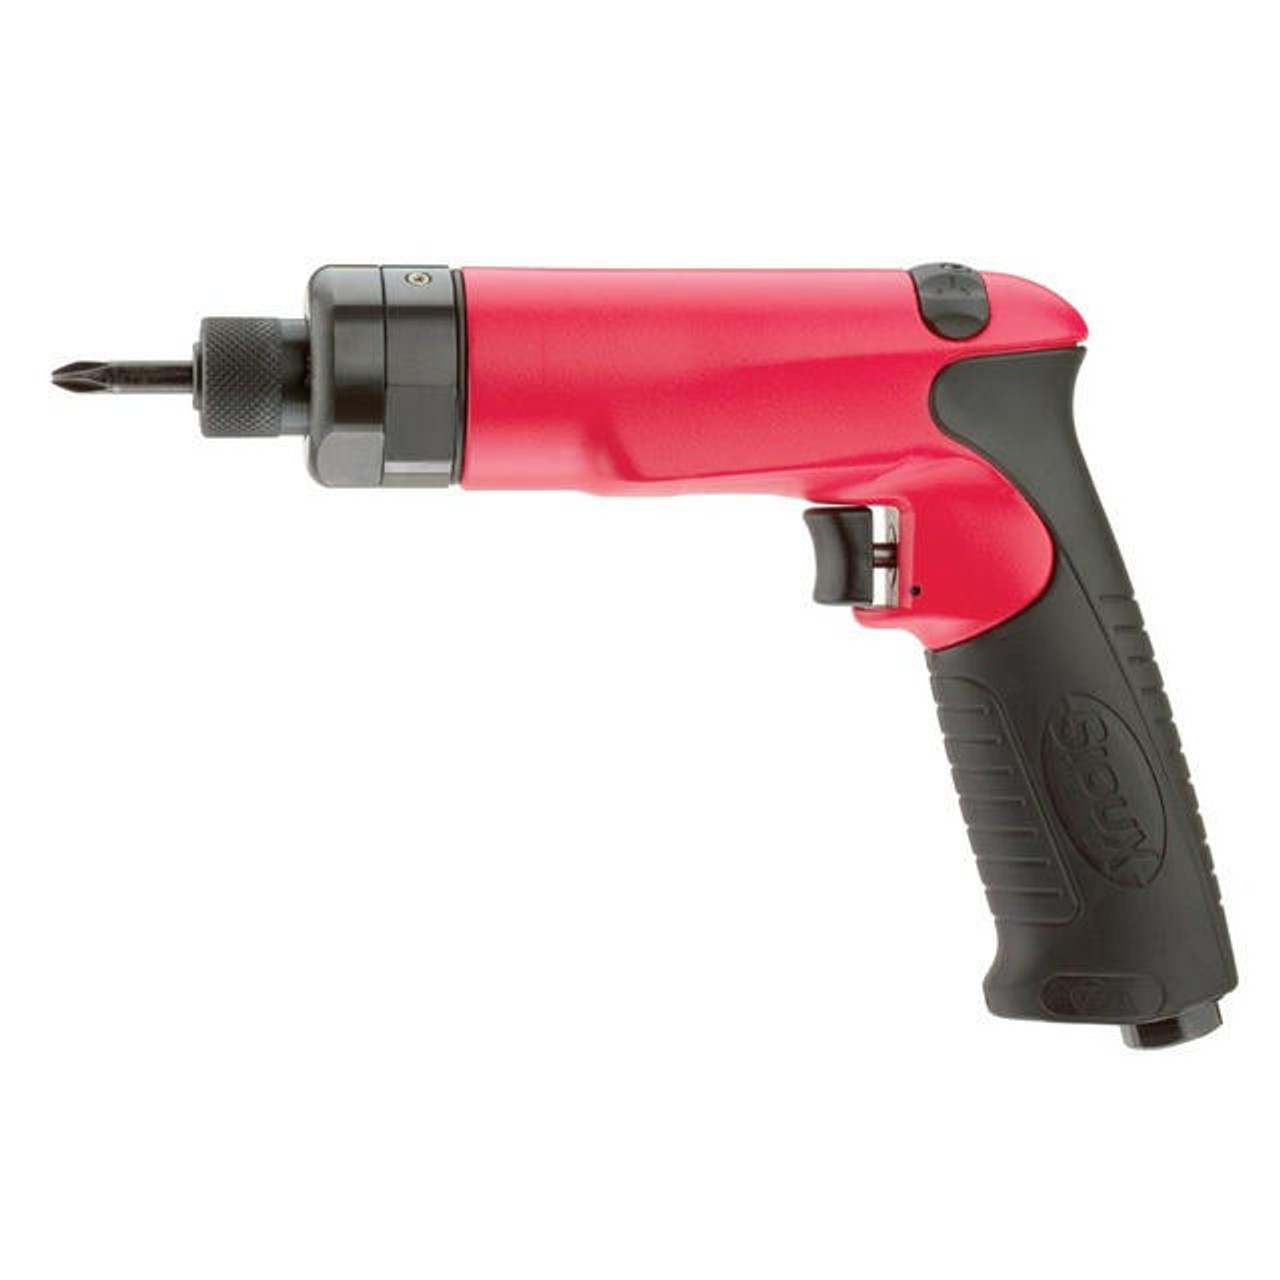  Sioux Tools SSD10P7S Stall Pistol Grip Screwdriver | Shuttle Reverse | 1 HP | 700 RPM | 220 in.-lb. Max Torque 